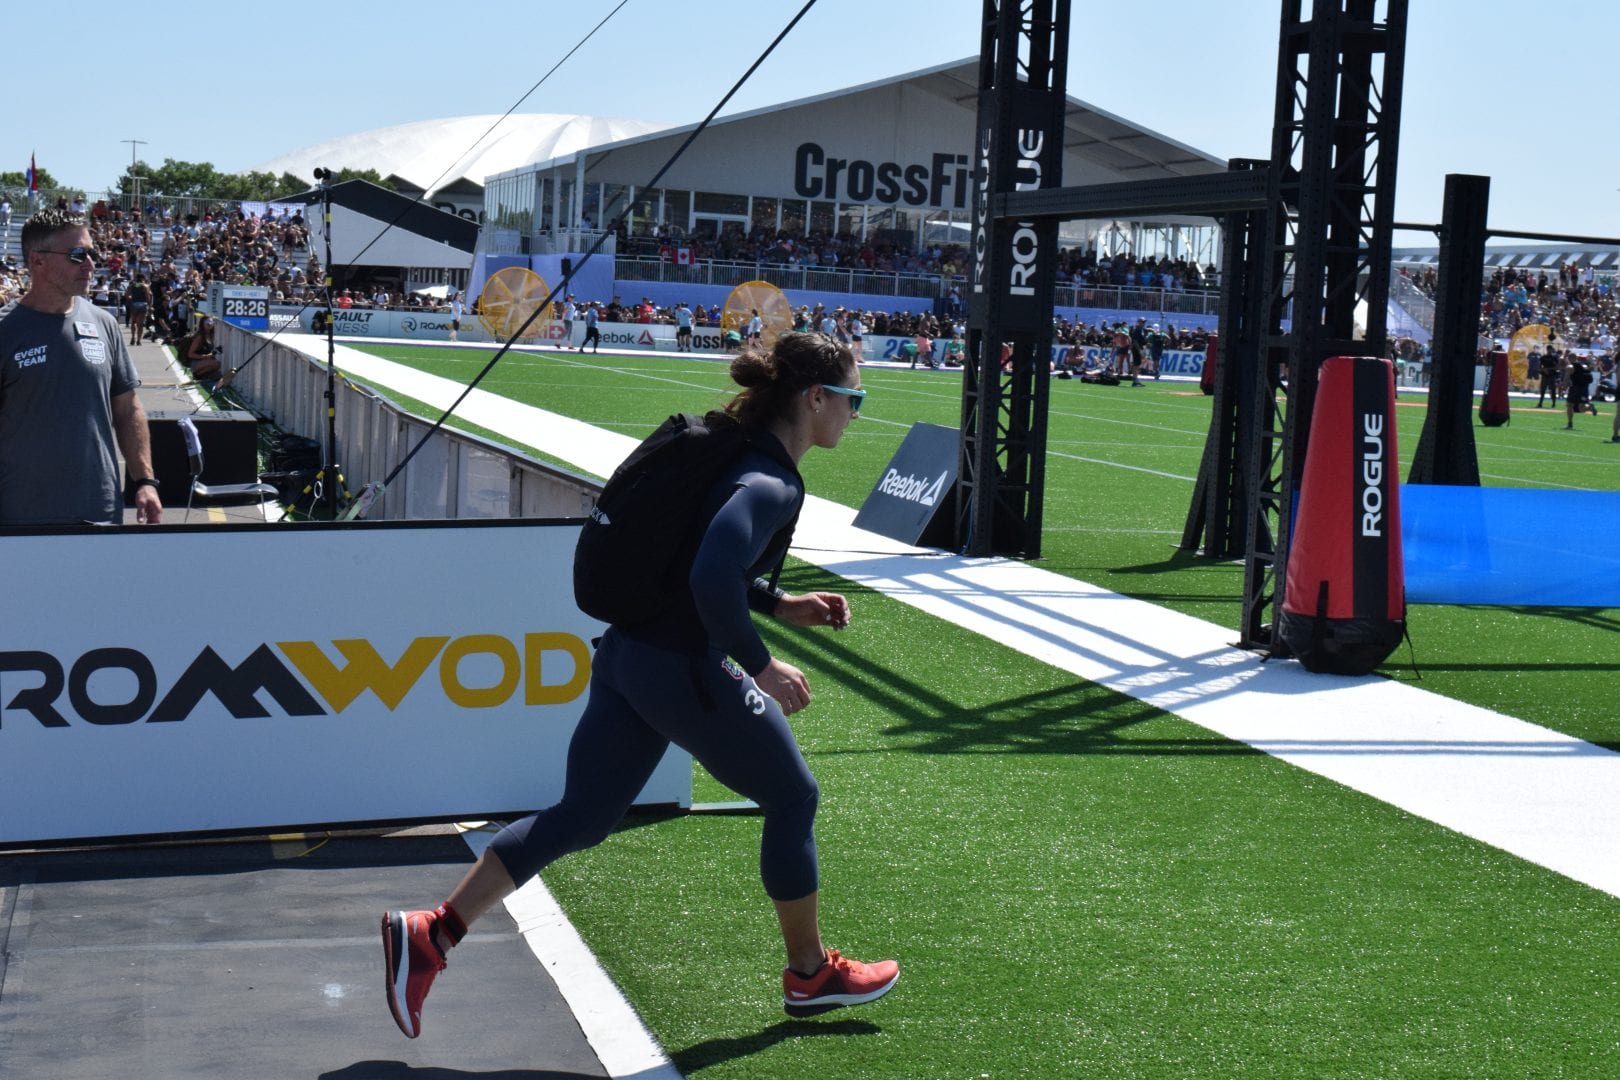 Bethany Shadburne of Streamline CrossFit completes the Ruck Run event at the 2019 CrossFit Games